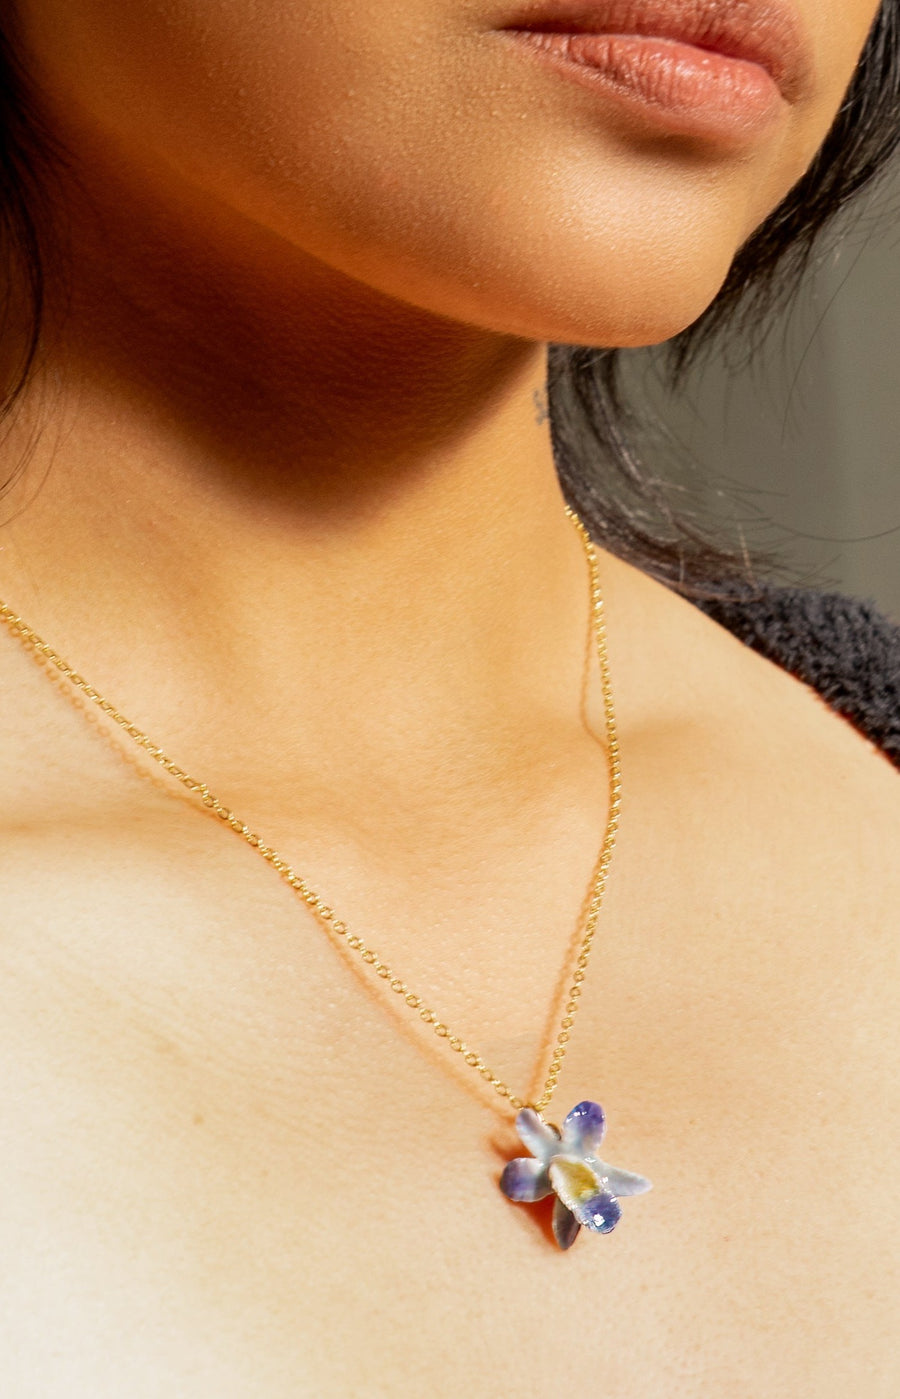 Earth Angel Orchid Necklace in Violet